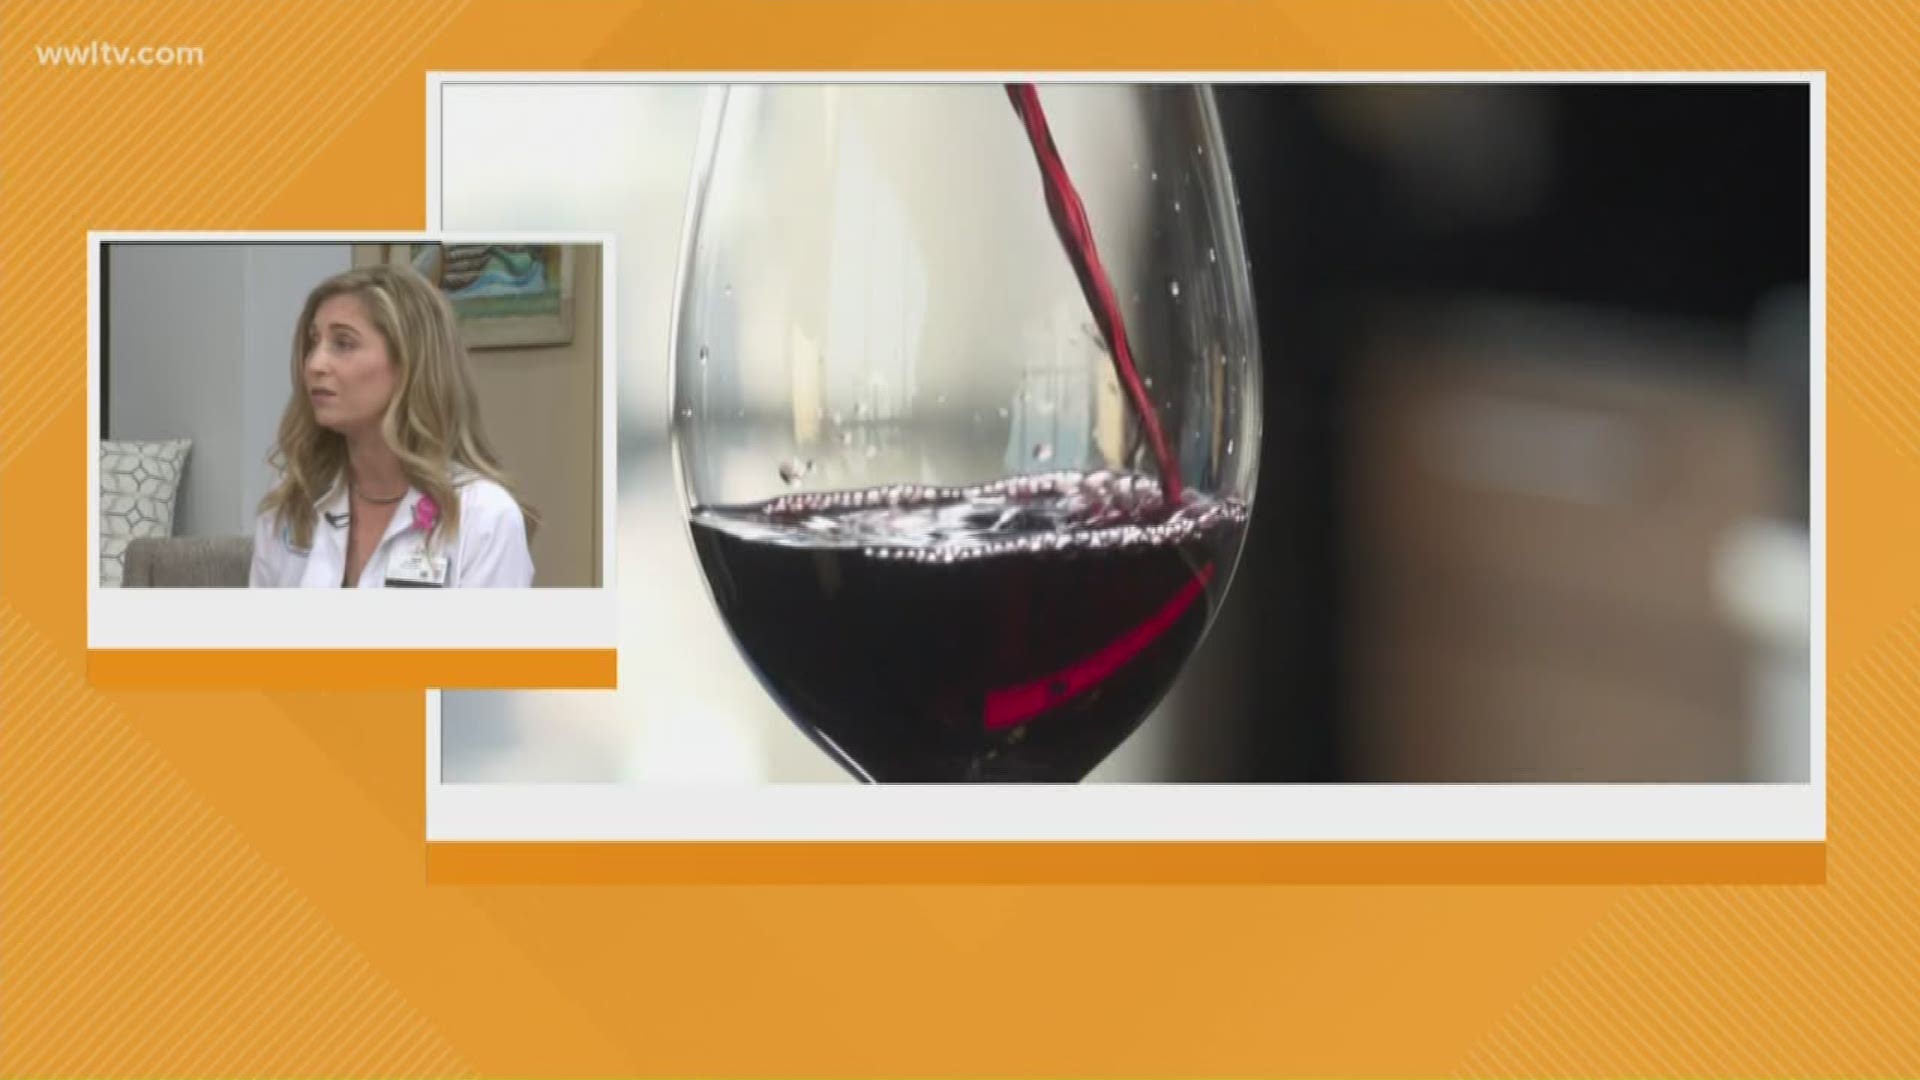 Dr. Meredith Maxwell has what health benefits you should look for before you pour that next glass of wine.